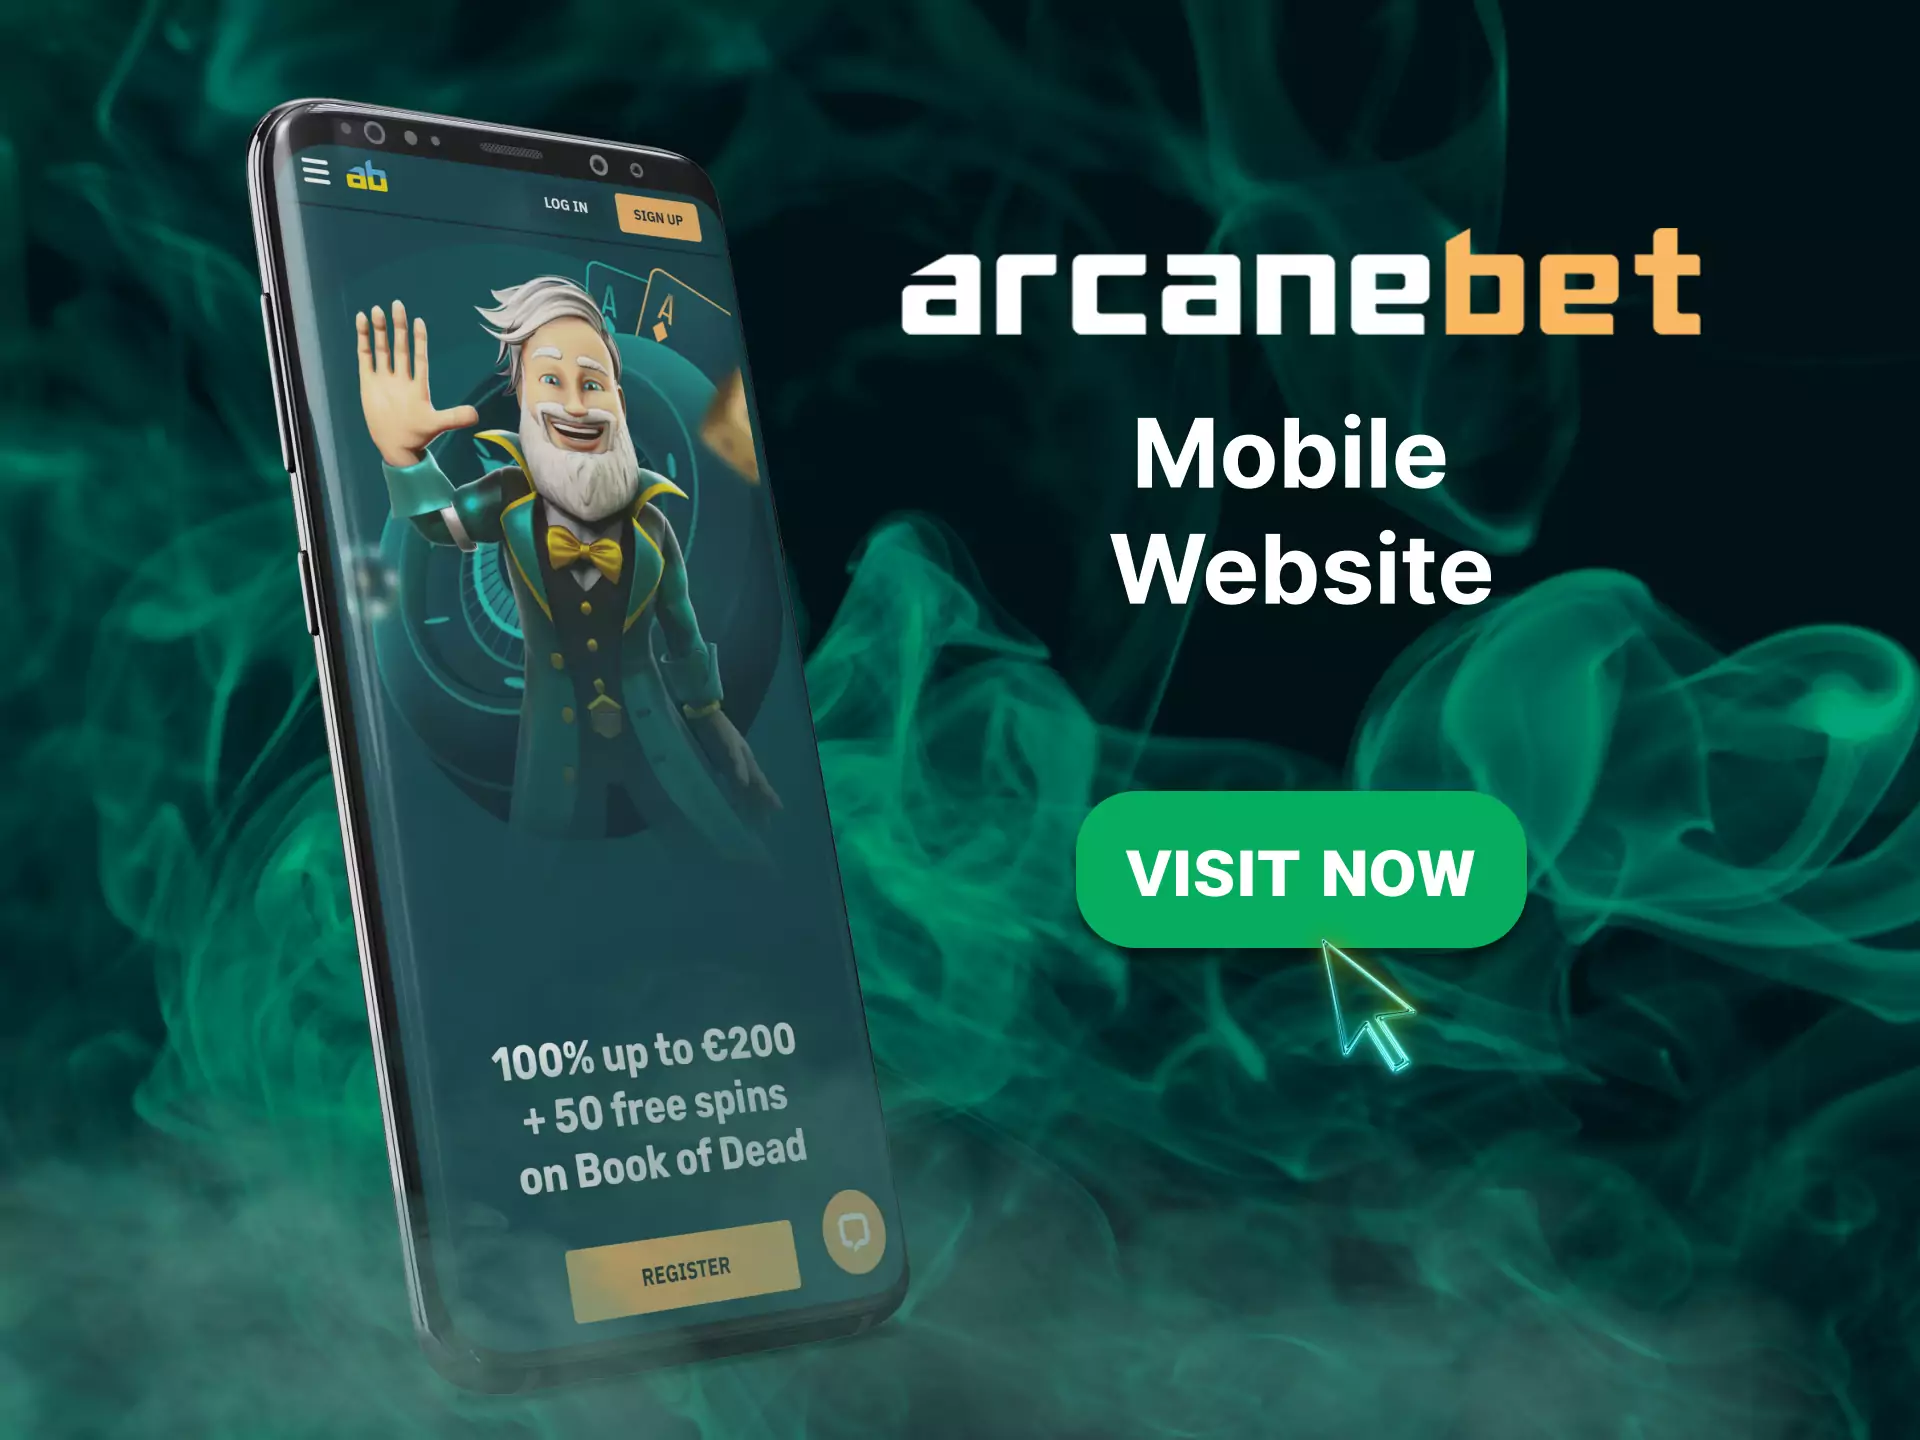 Arcanebet has a convenient mobile website with all the features.